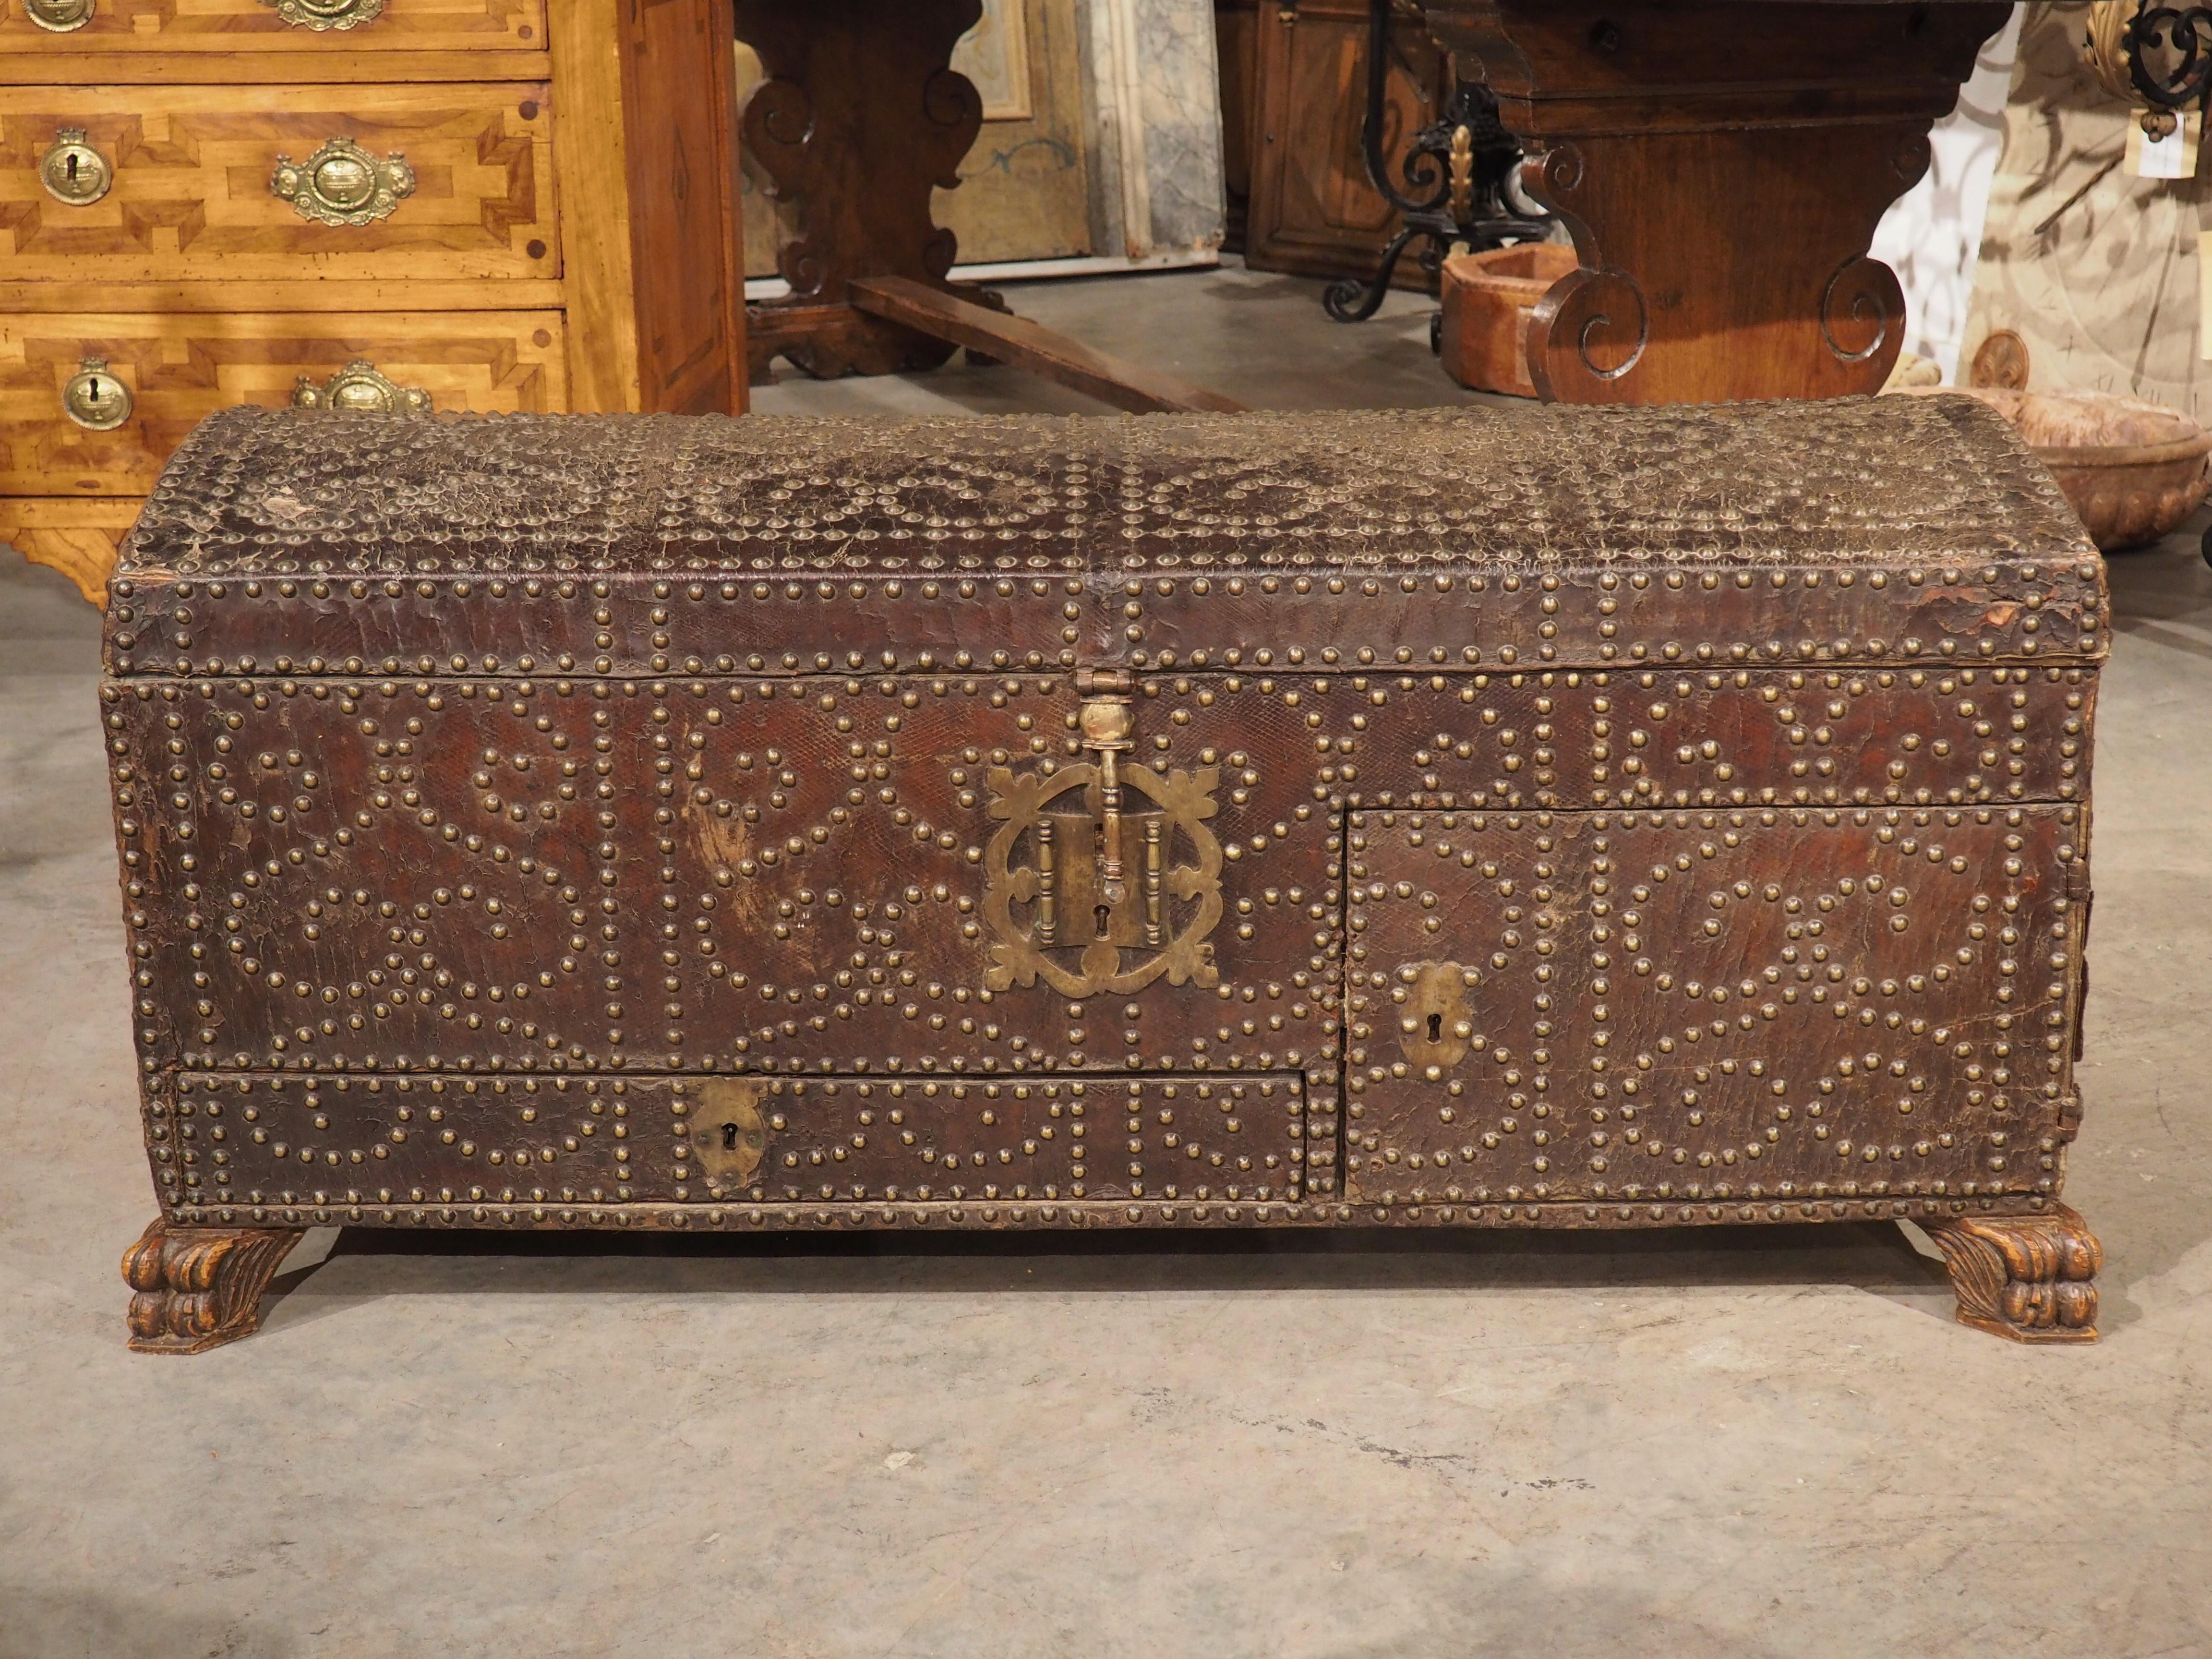 Hand-Carved 18th Century Spanish Studded Leather Trunk with Lockable Compartments For Sale